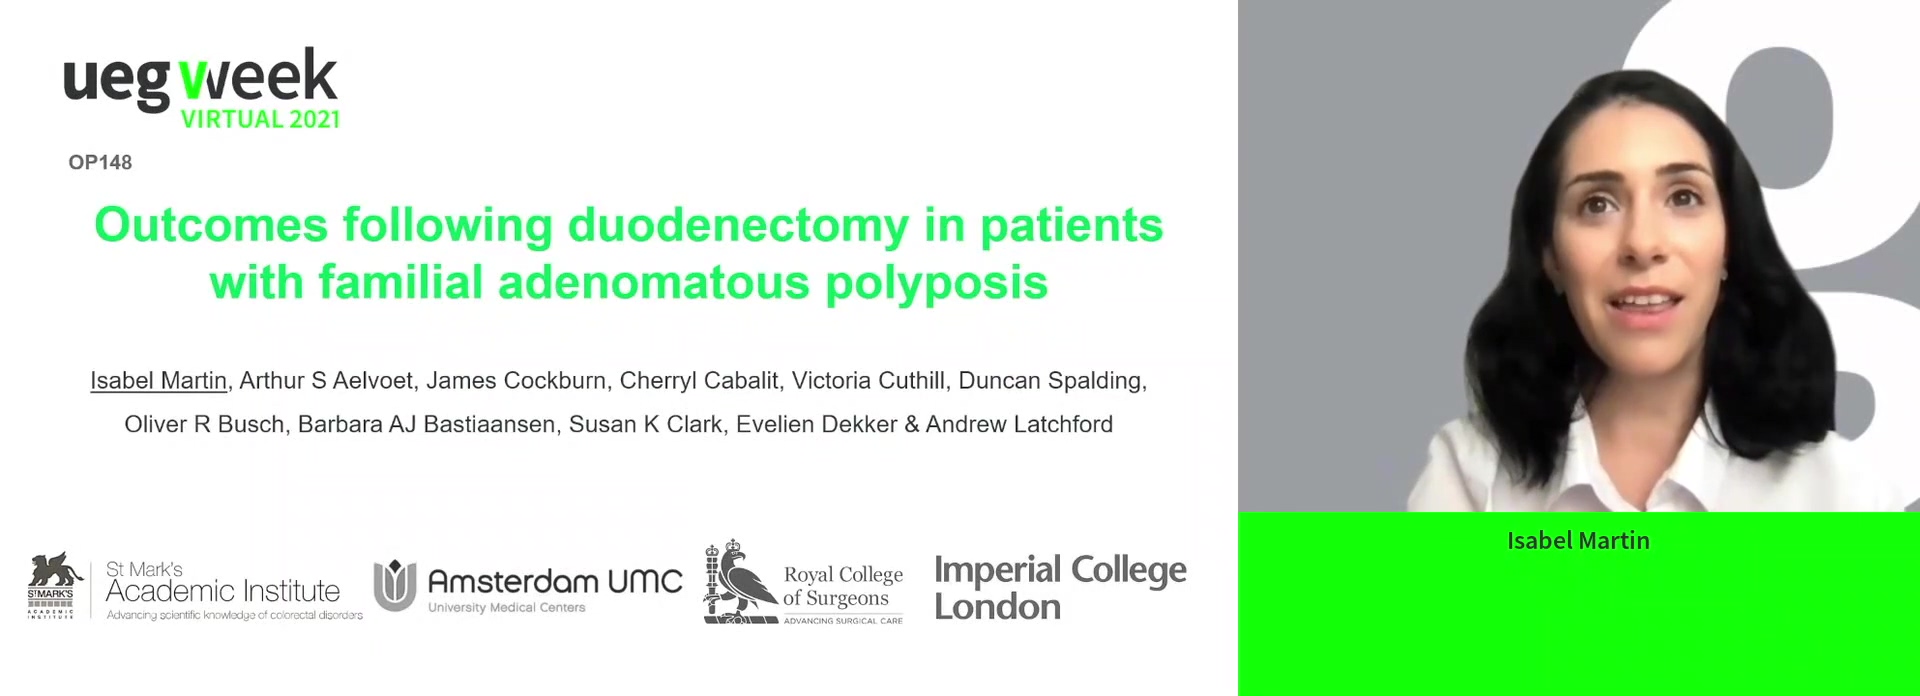 OUTCOMES FOLLOWING DUODENECTOMY IN PATIENTS WITH FAMILIAL ADENOMATOUS POLYPOSIS